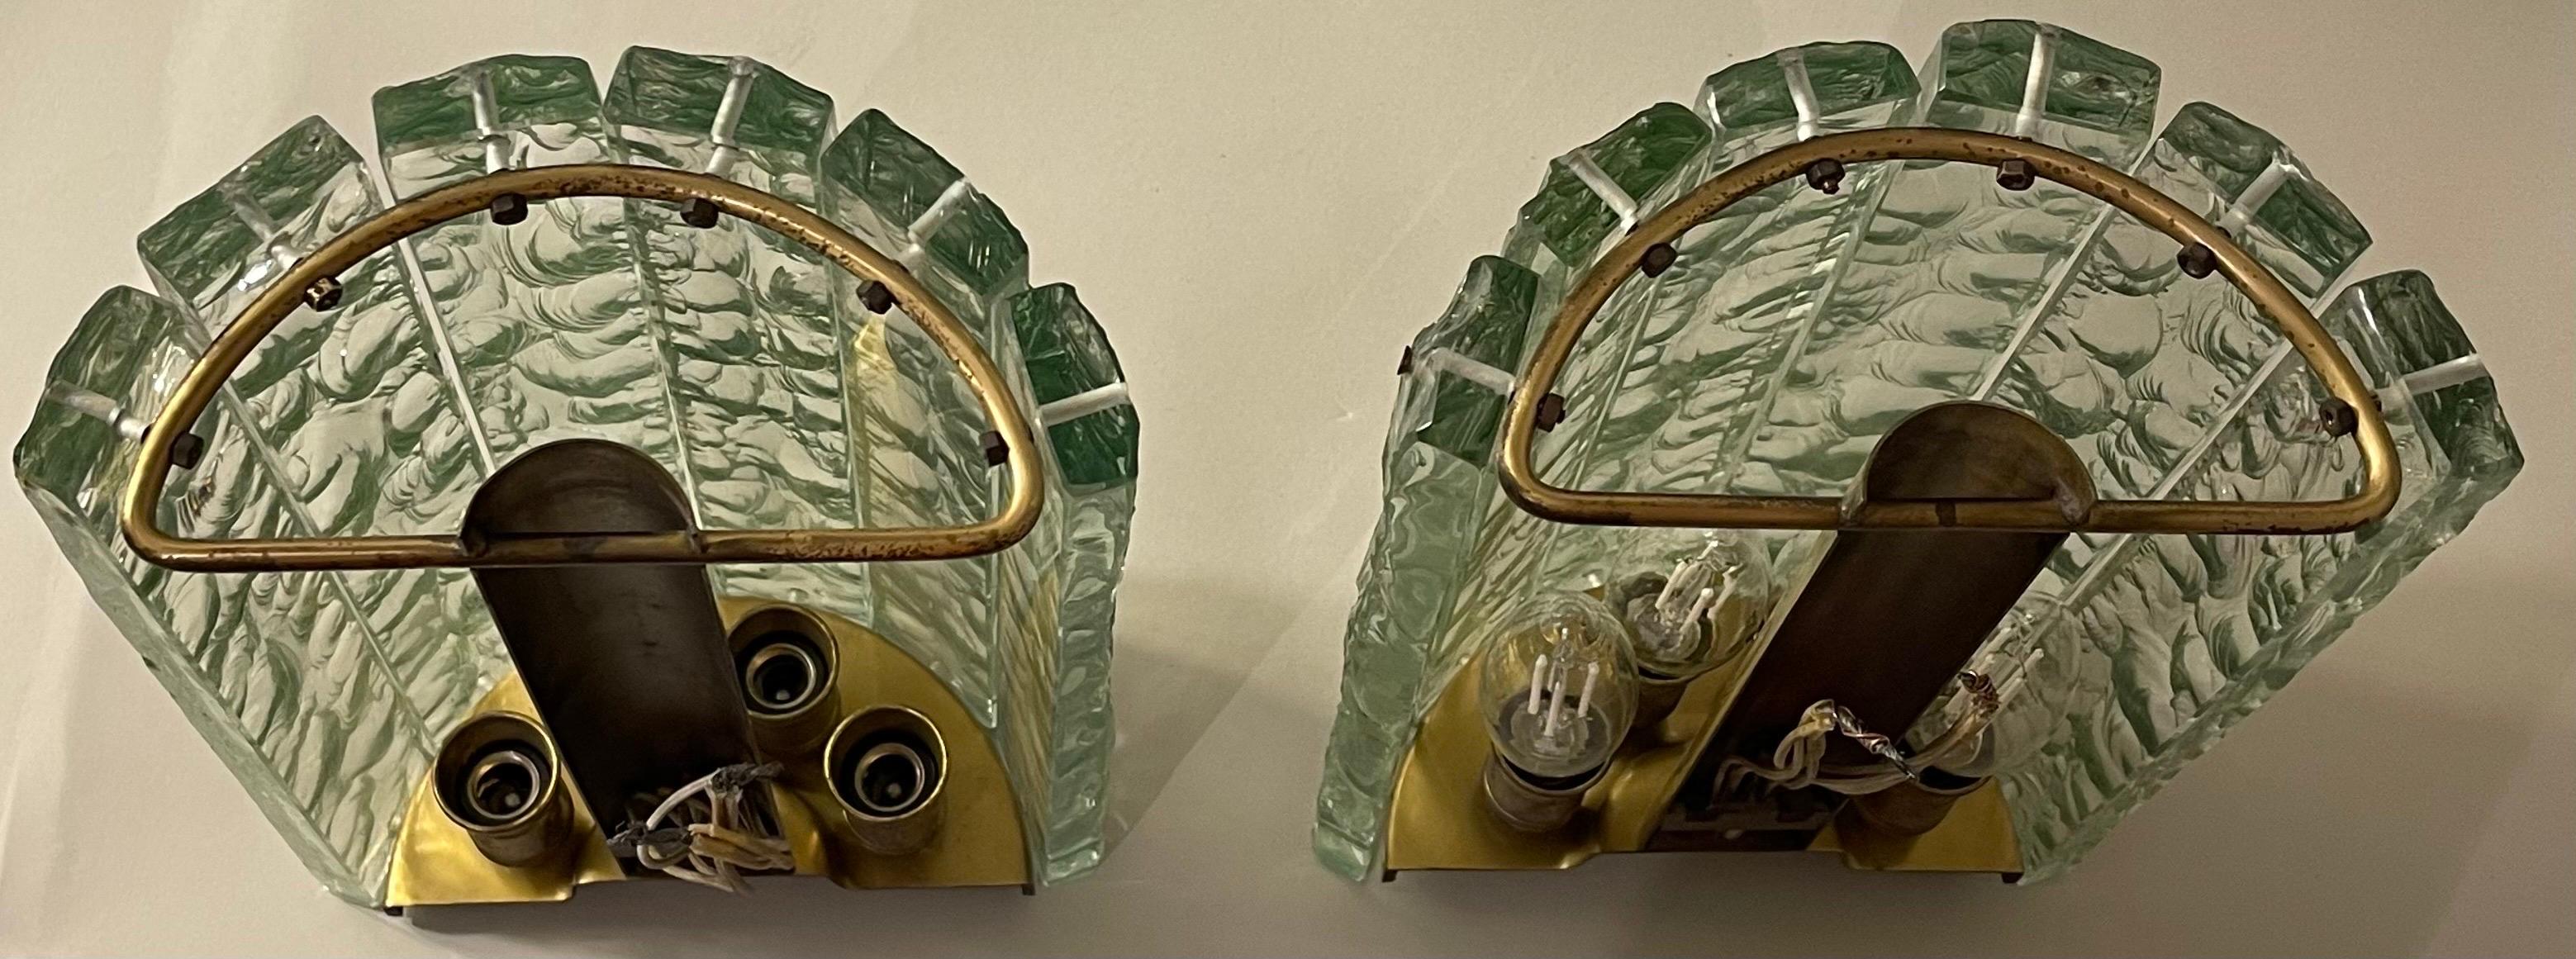 Pair of Wall Sconces by Max Ingrand for Fontana Arte, Mod.2458, Italy 1960s For Sale 9